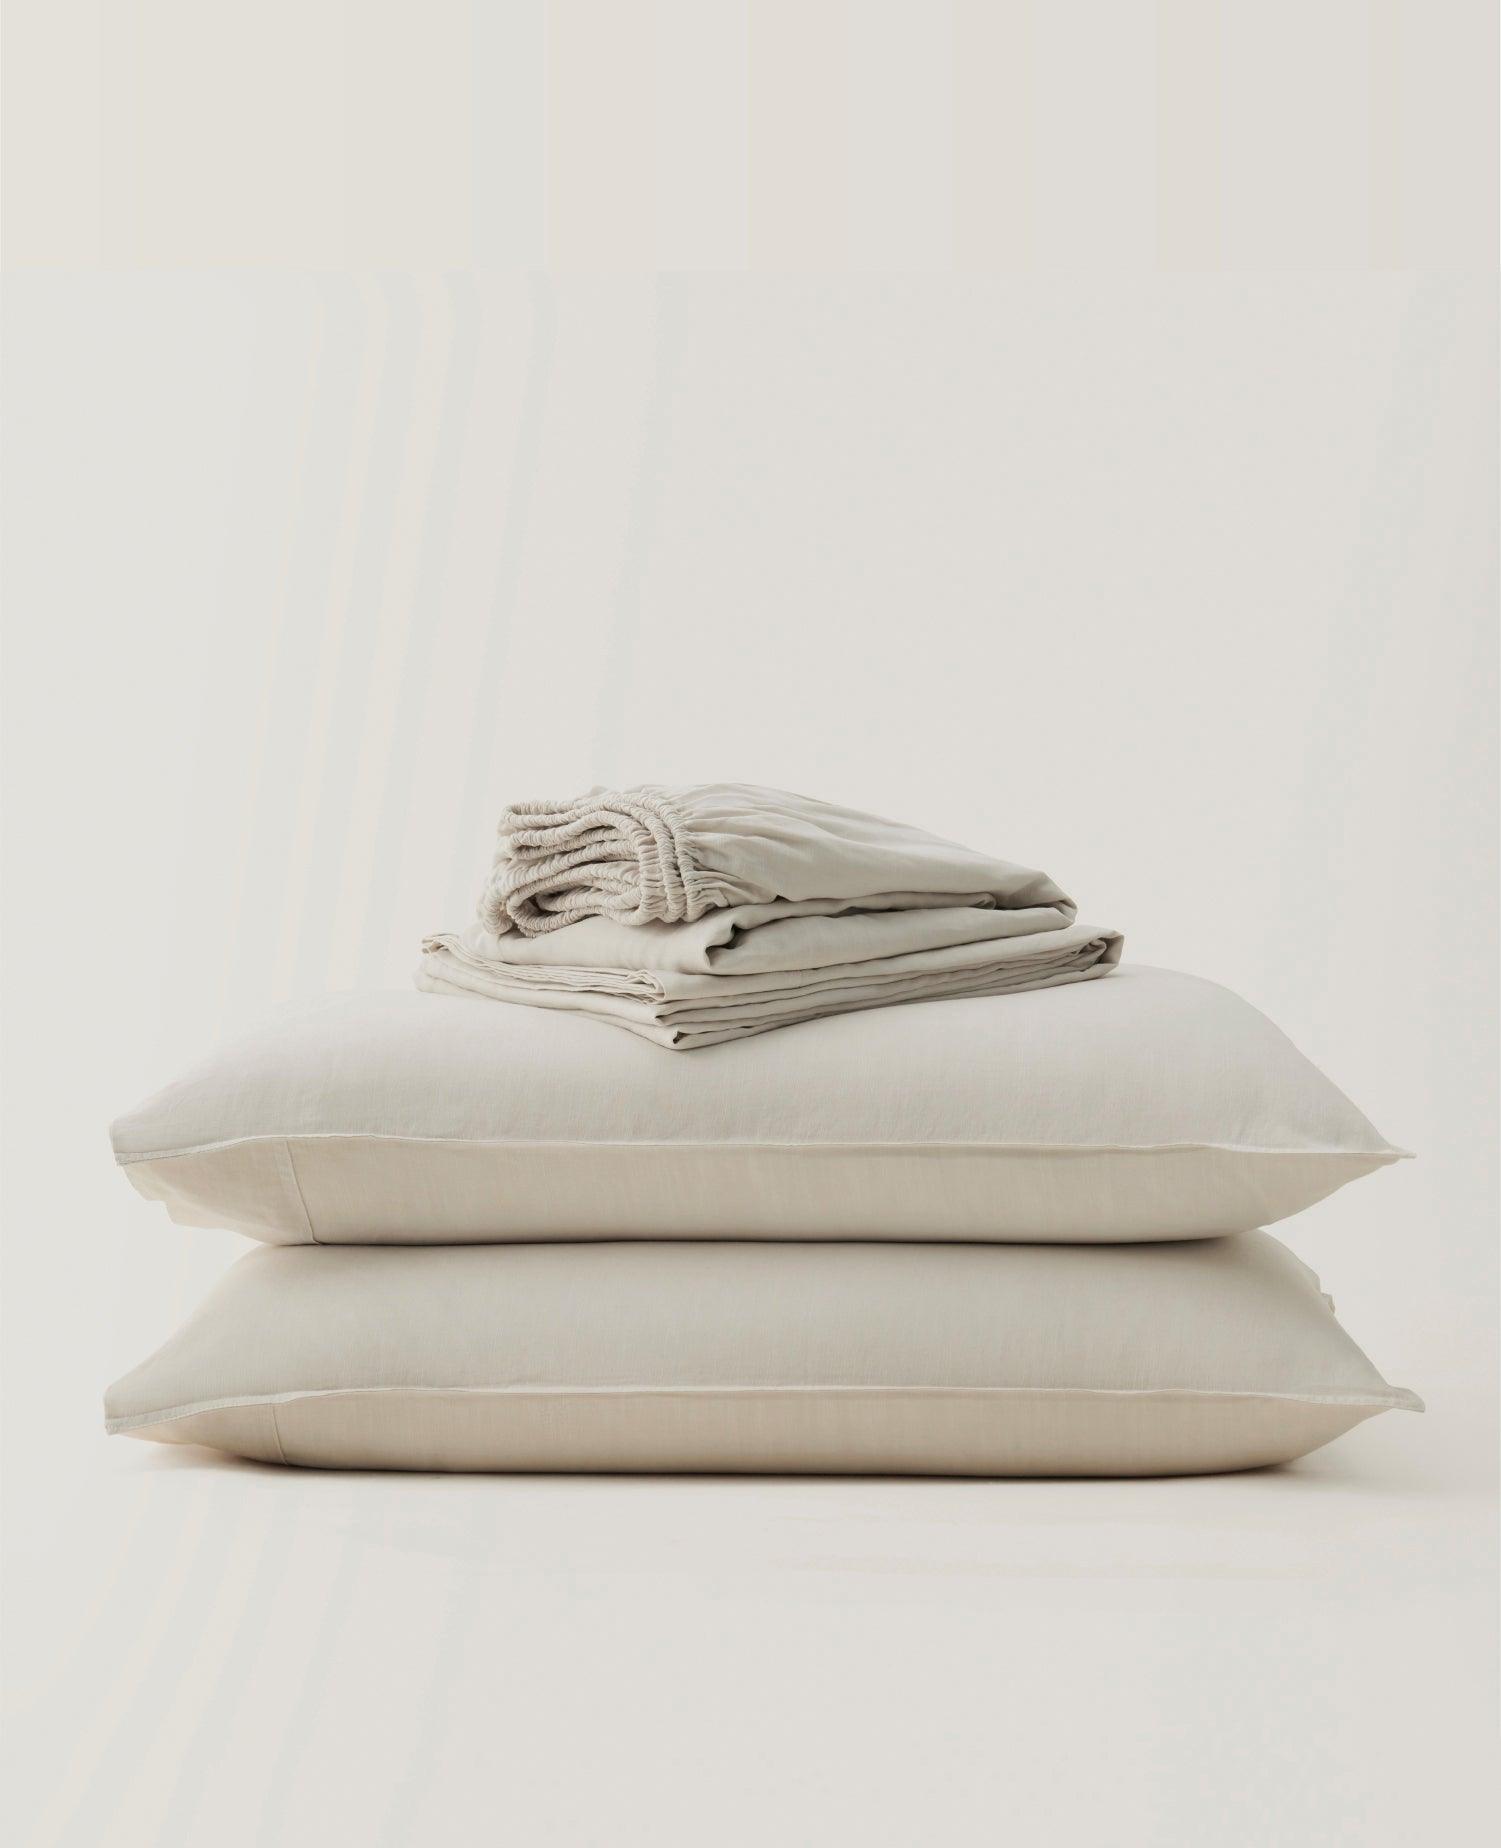 Double Stitch by Bedsure Linen Lyocell Sheets - Deep Pocket Queen Sheet  Set, Sustainable Moisture-Wi…See more Double Stitch by Bedsure Linen  Lyocell